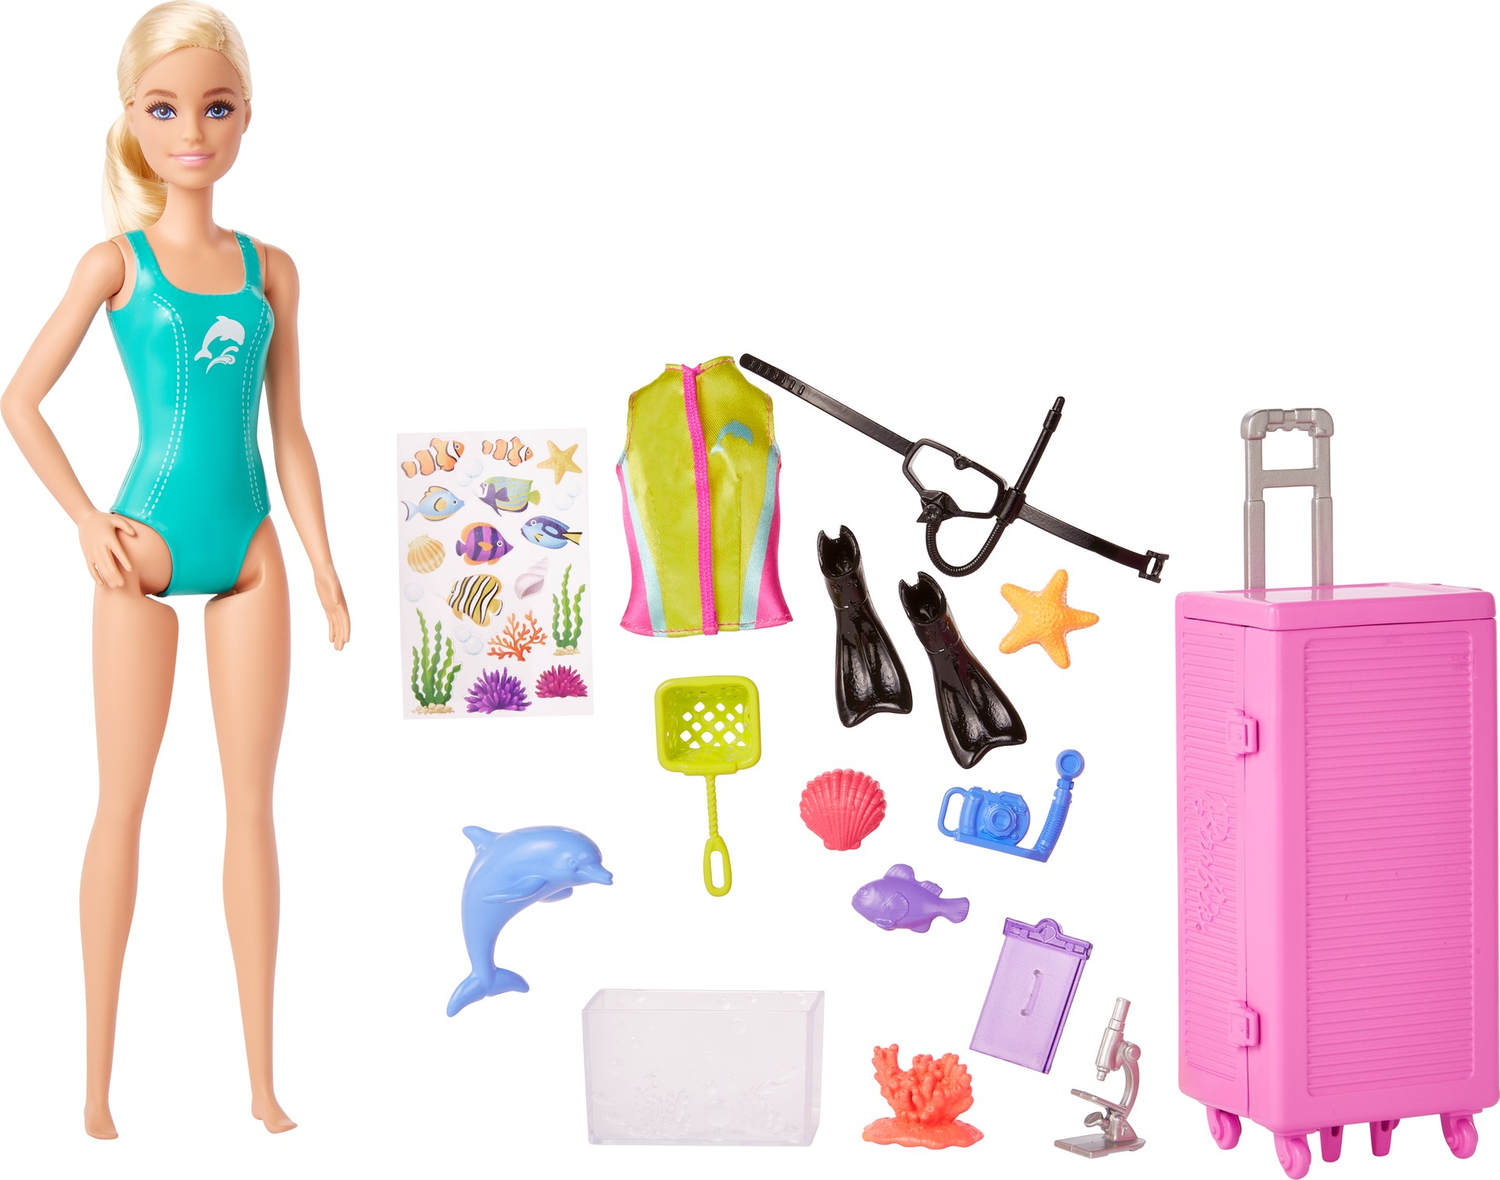 Barbie You Can Be Anything Marine Biologist